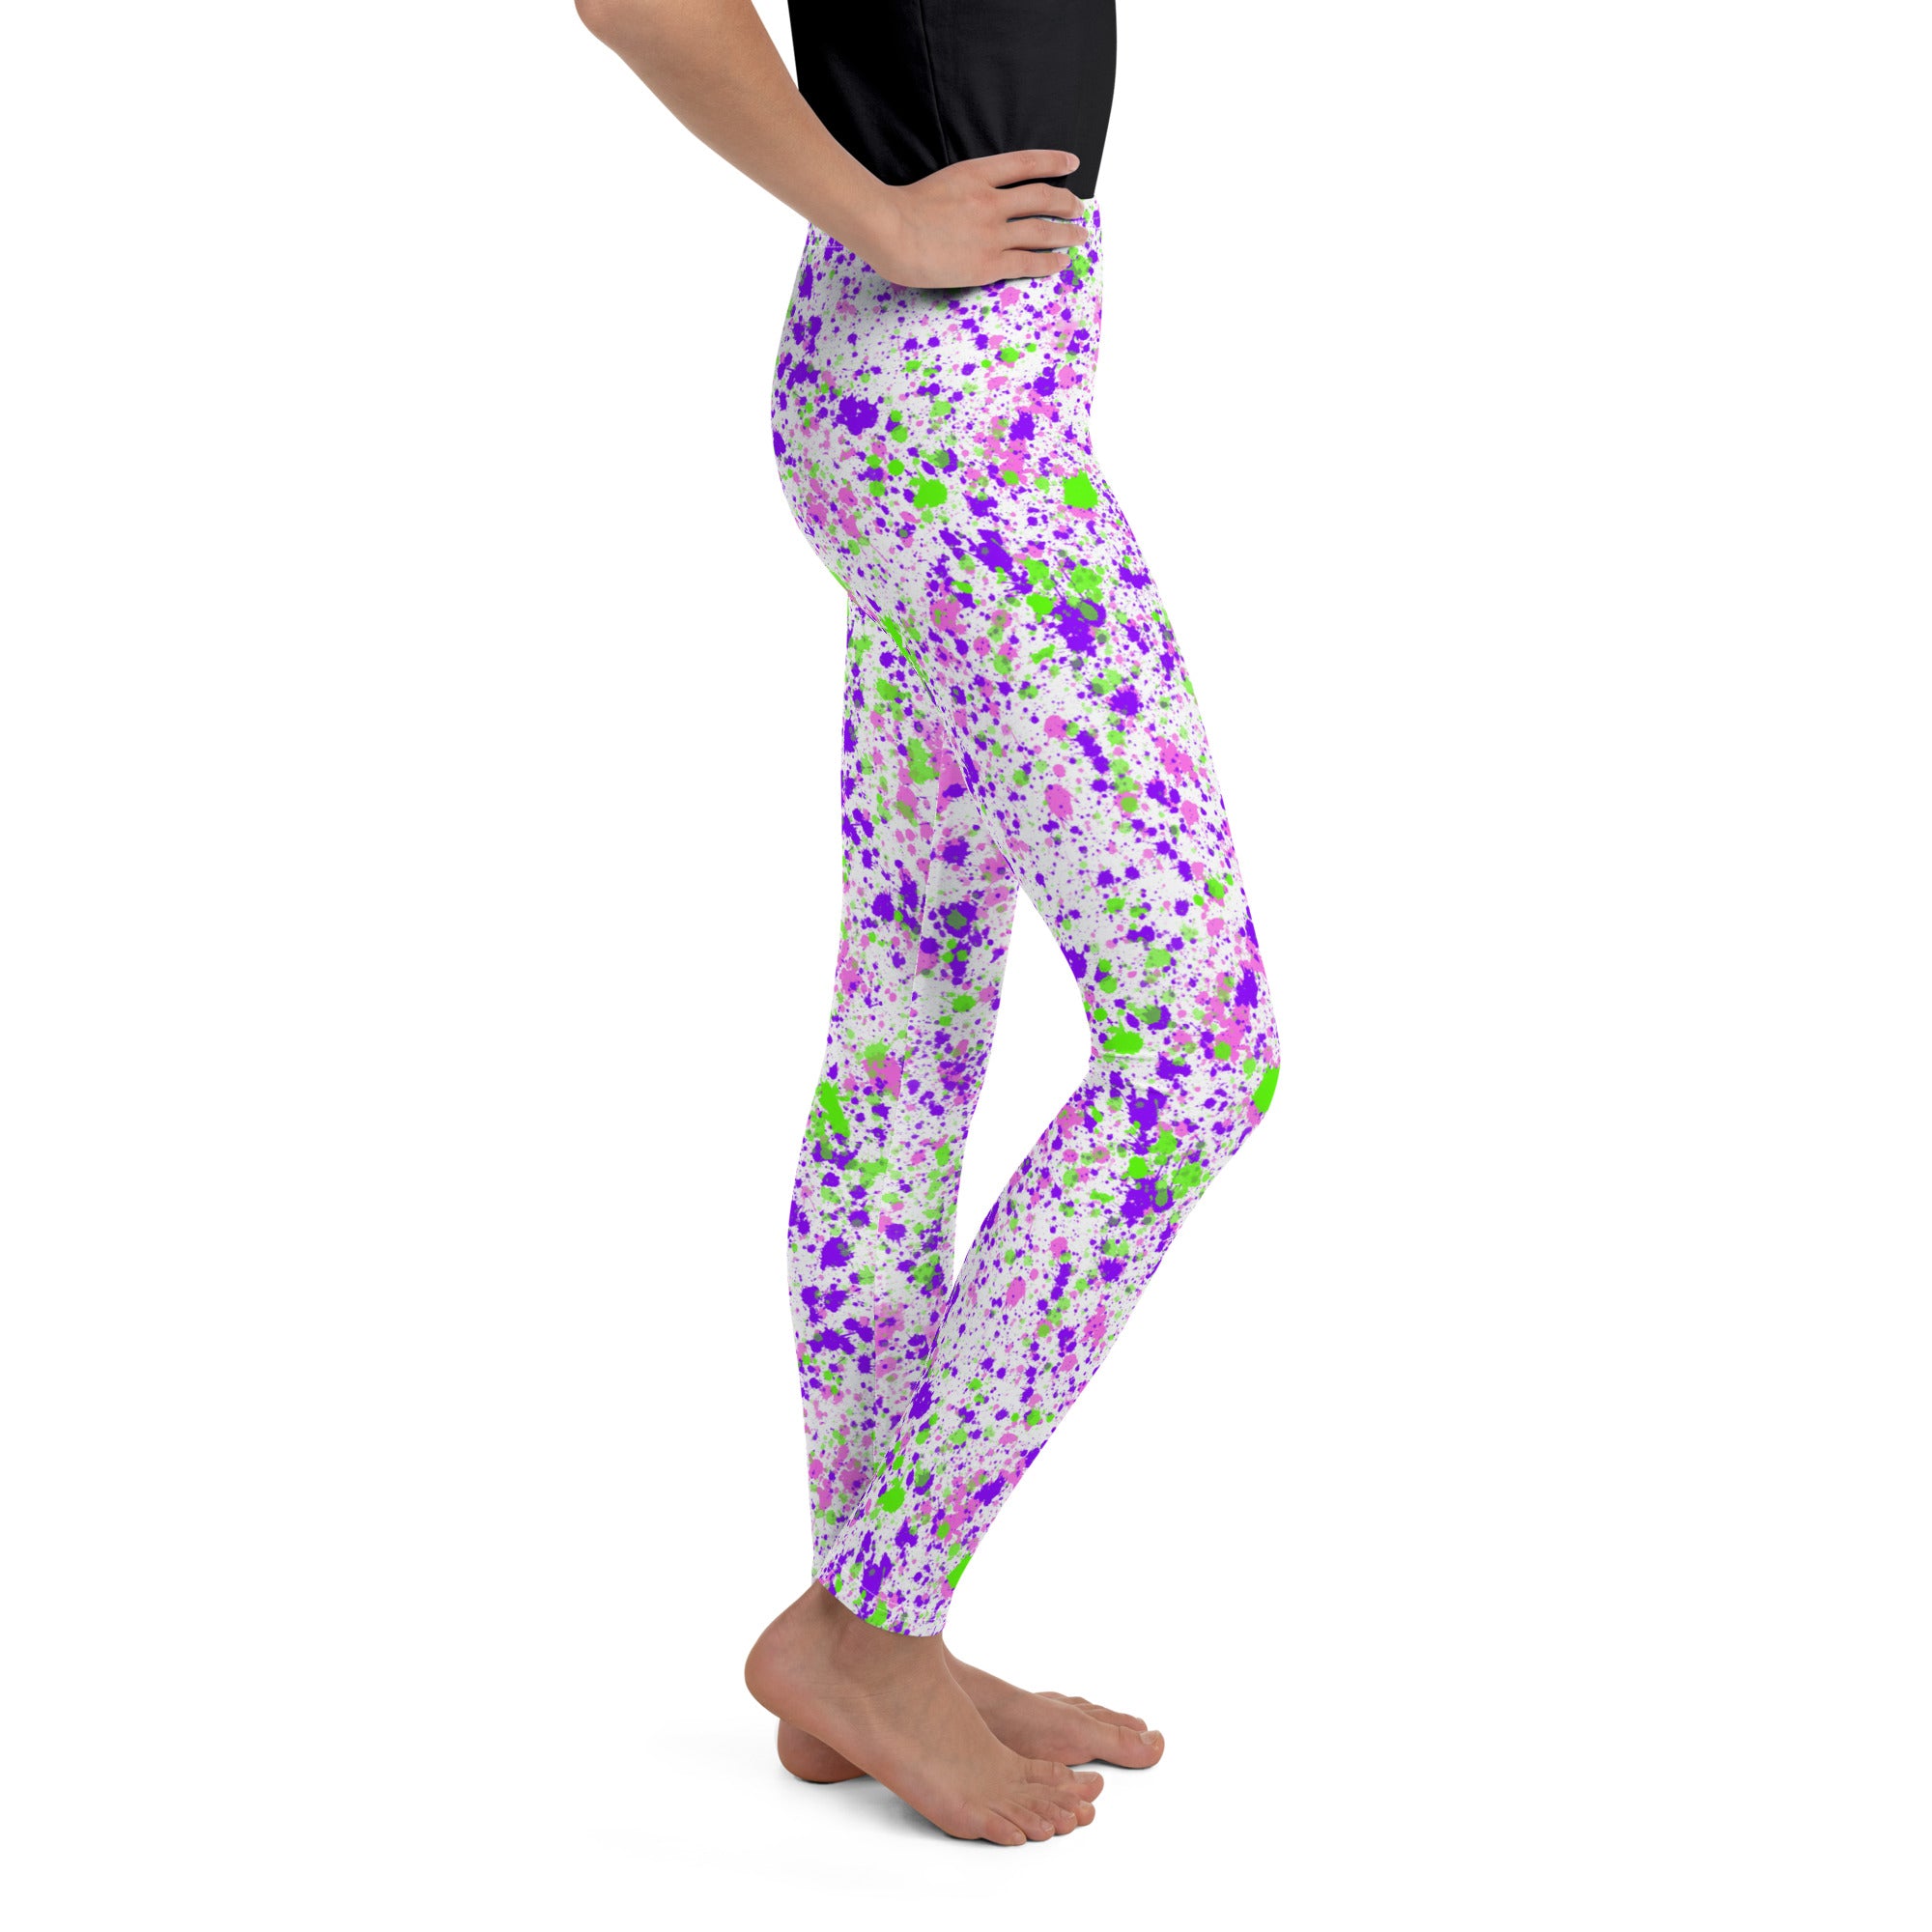 Youth Leggings- Paint splatters Green with Blue